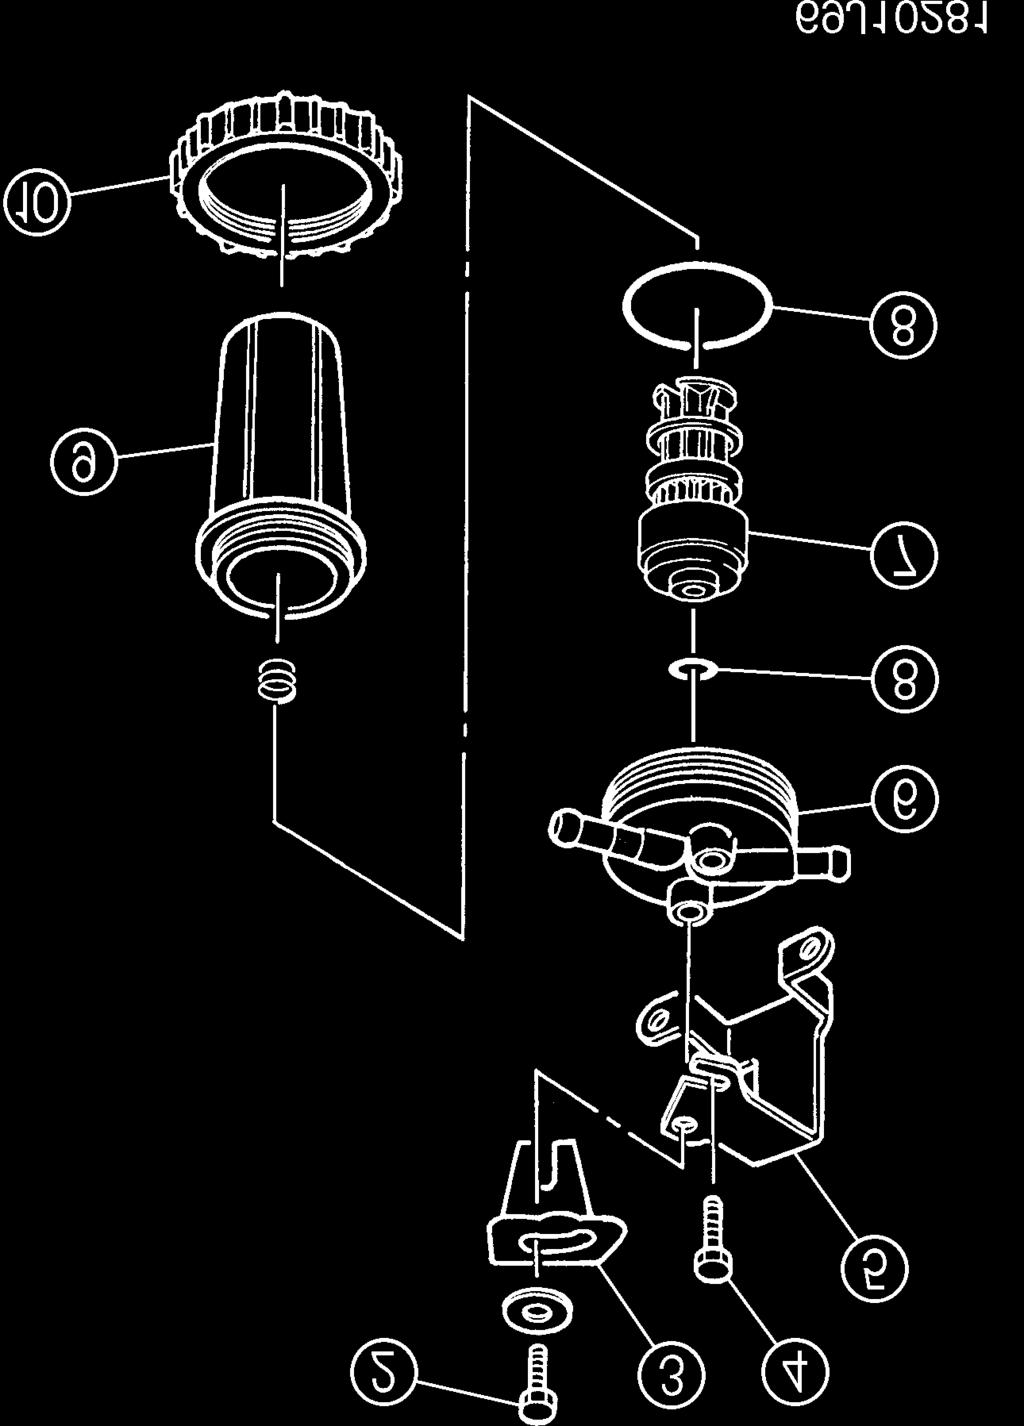 MU01676 Cleaning Fuel Filter 1) Remove the bolts 1 that are securing the fuel filter bracket 5 in place. 2) Loosen the bolt 2 that retains the lock tab 3, and remove the lock tab.